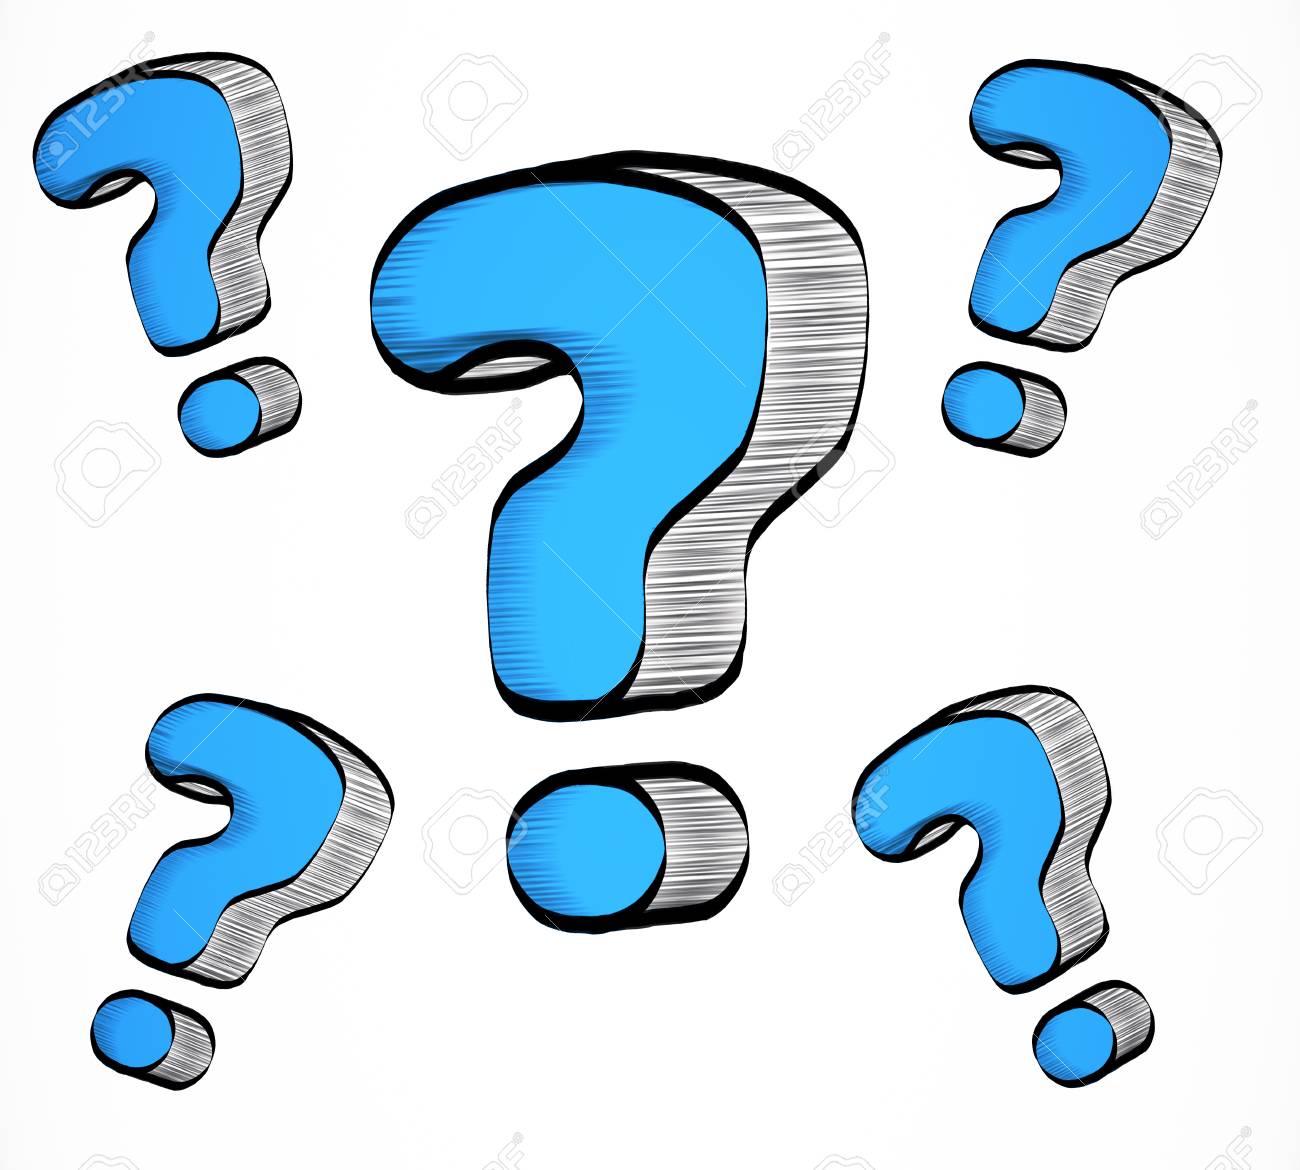 85037728-drawn-blue-question-marks-on-white-background-enquiry-concept.jpg